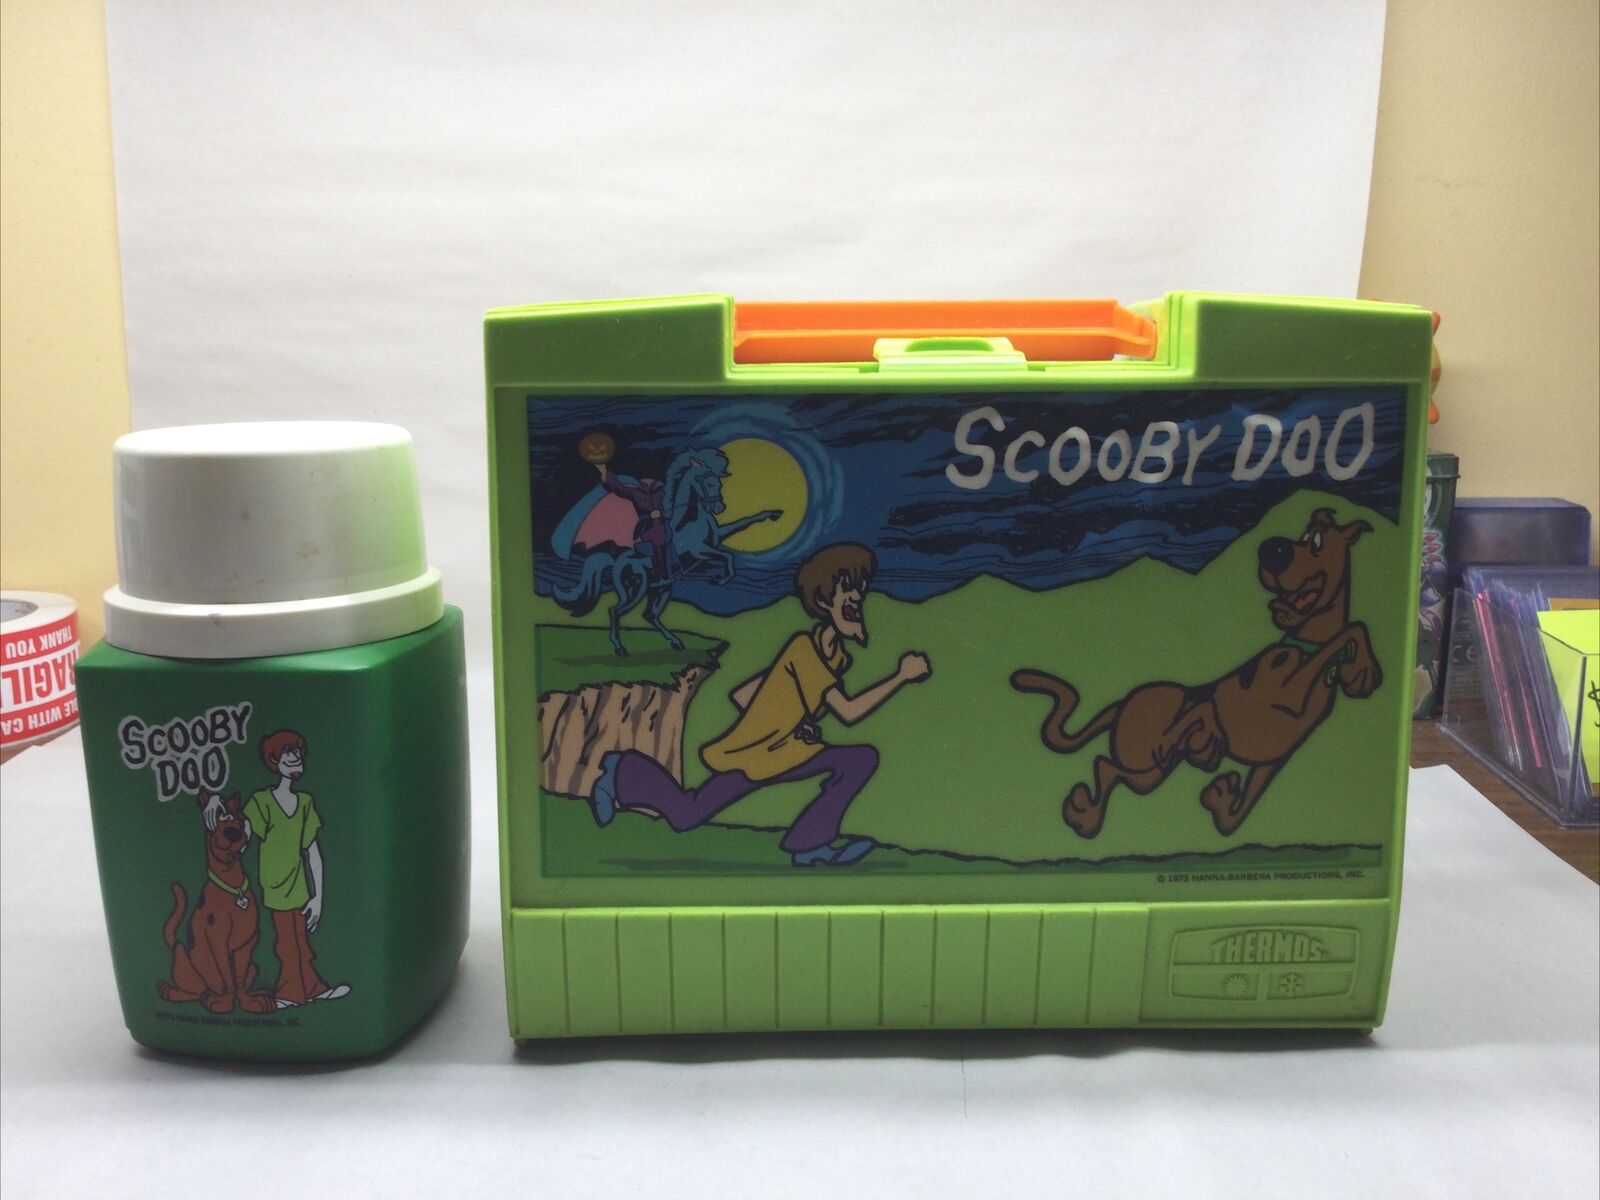 1973 Hannah Barbara Scooby-doo Thermos Lunch box Plastic Thermos Included